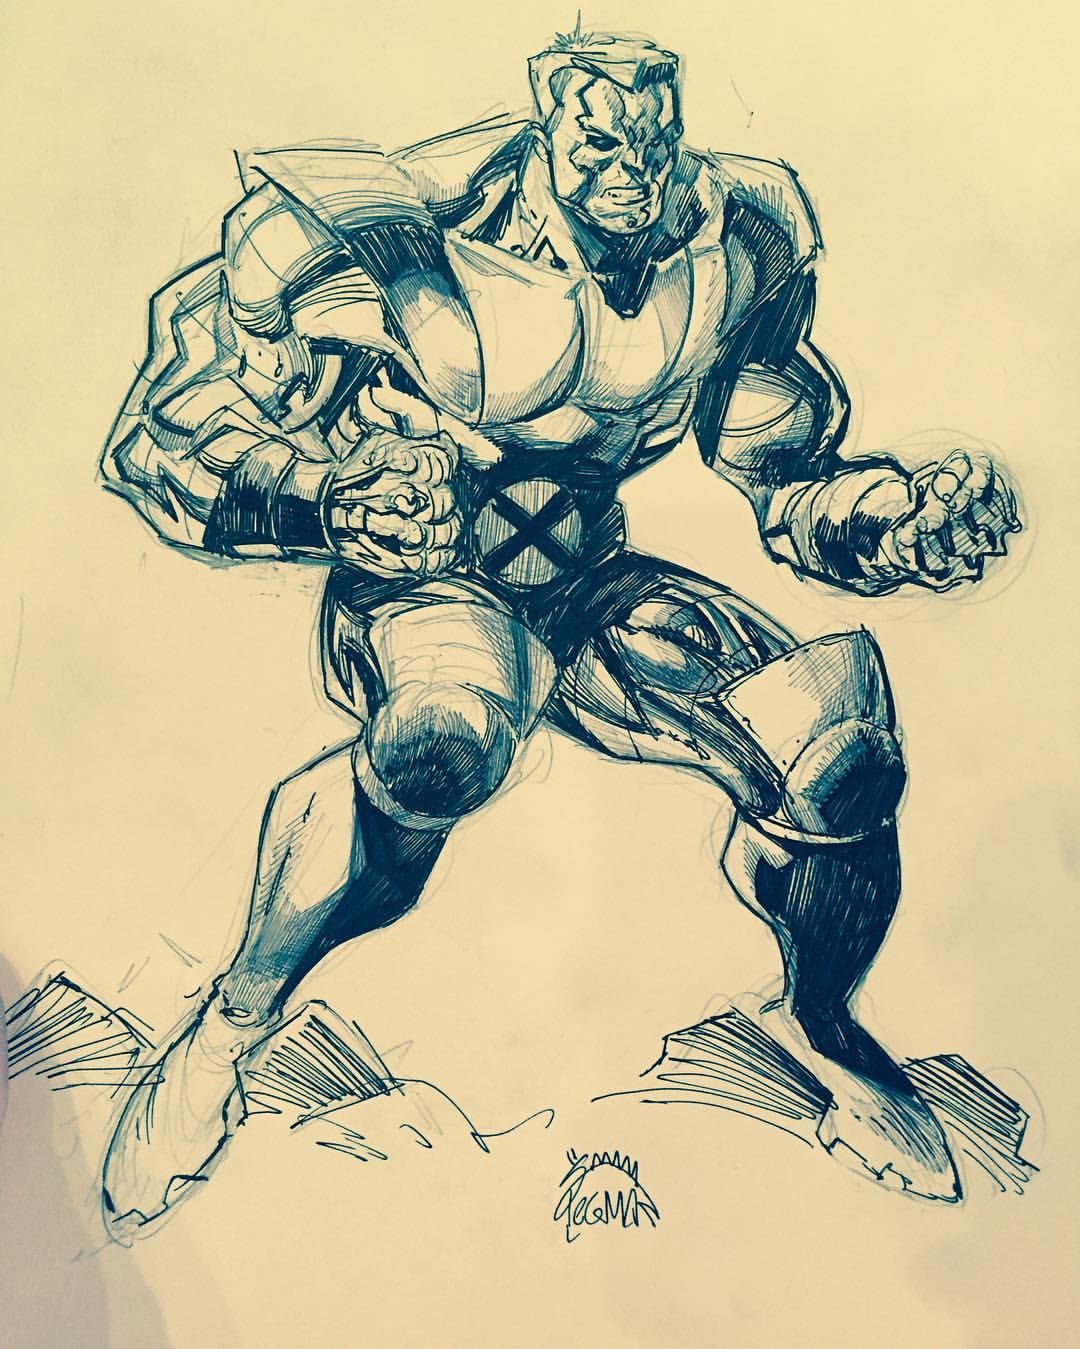 Ryan Stegman Sketch at PaintingValley.com | Explore collection of Ryan ...